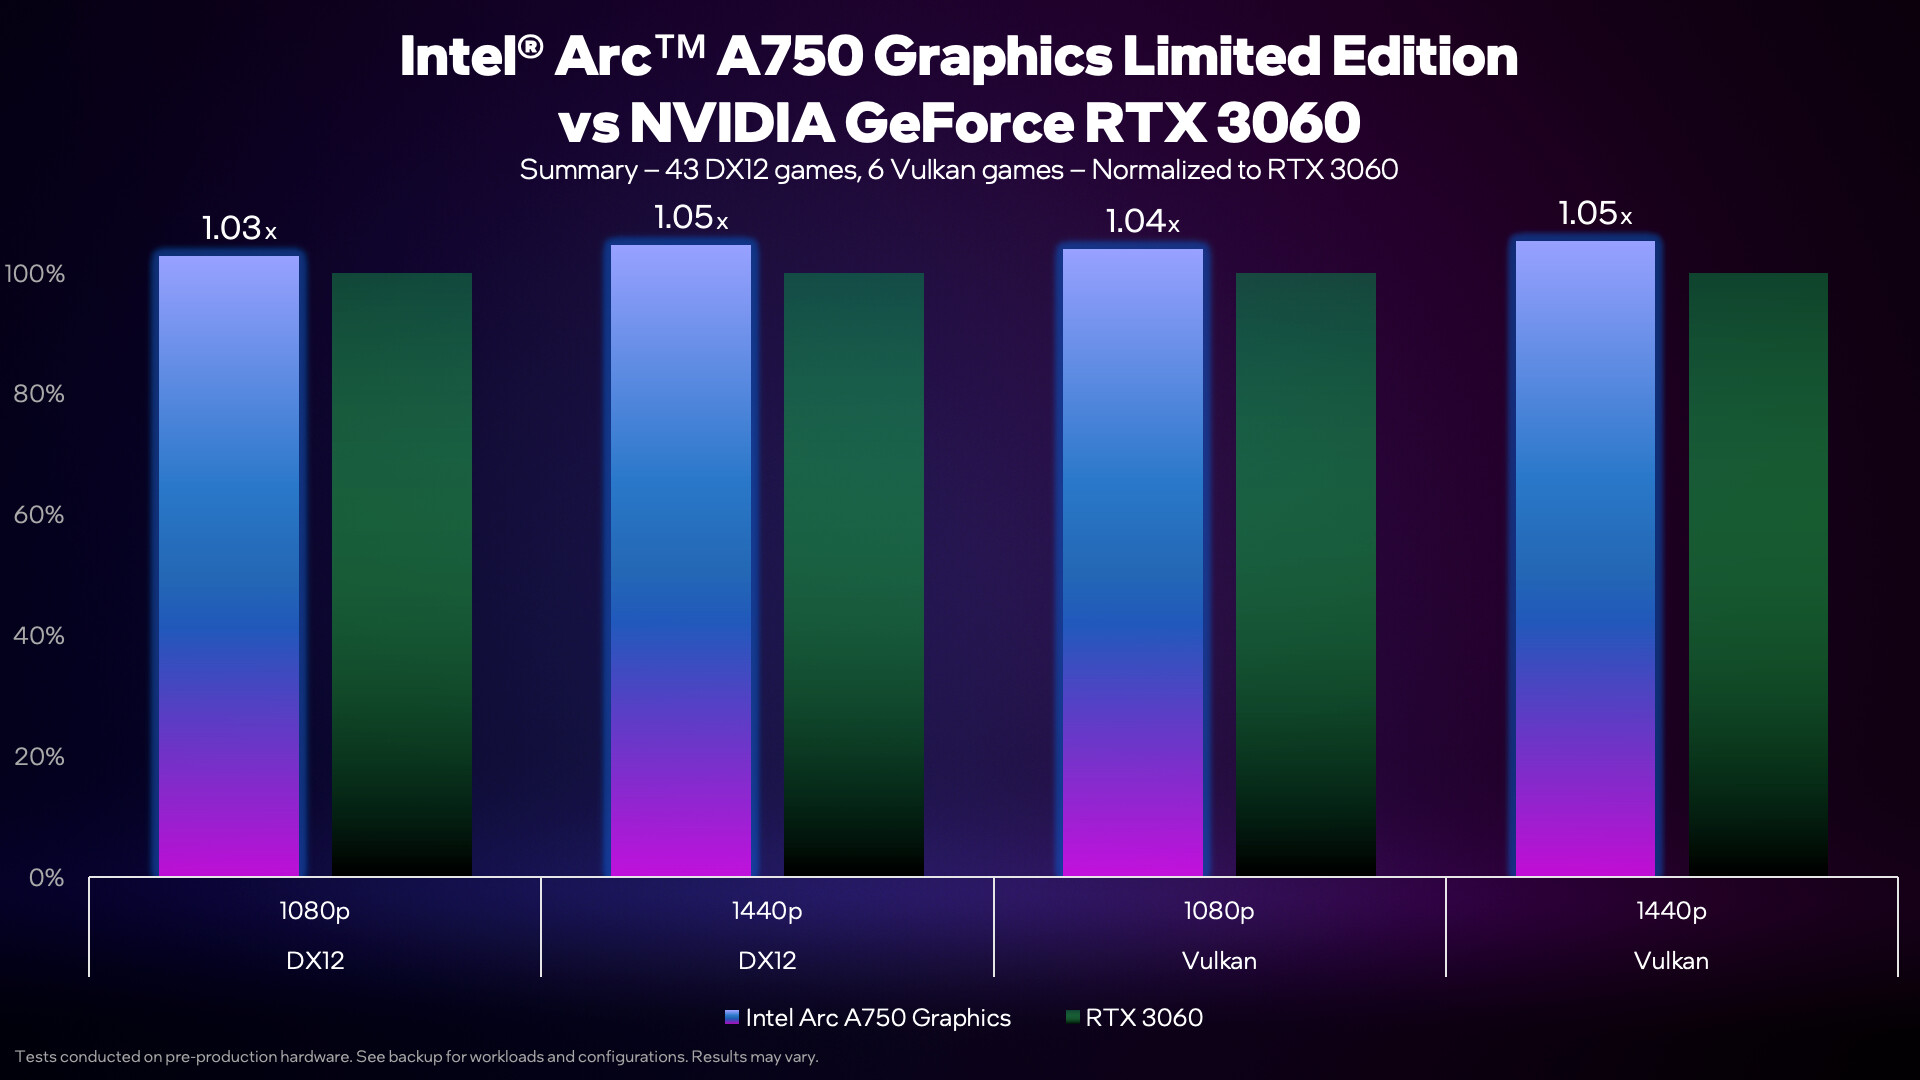 GeForce RTX 3060 Trades Blows with Intel Arc A750 in 50 Games